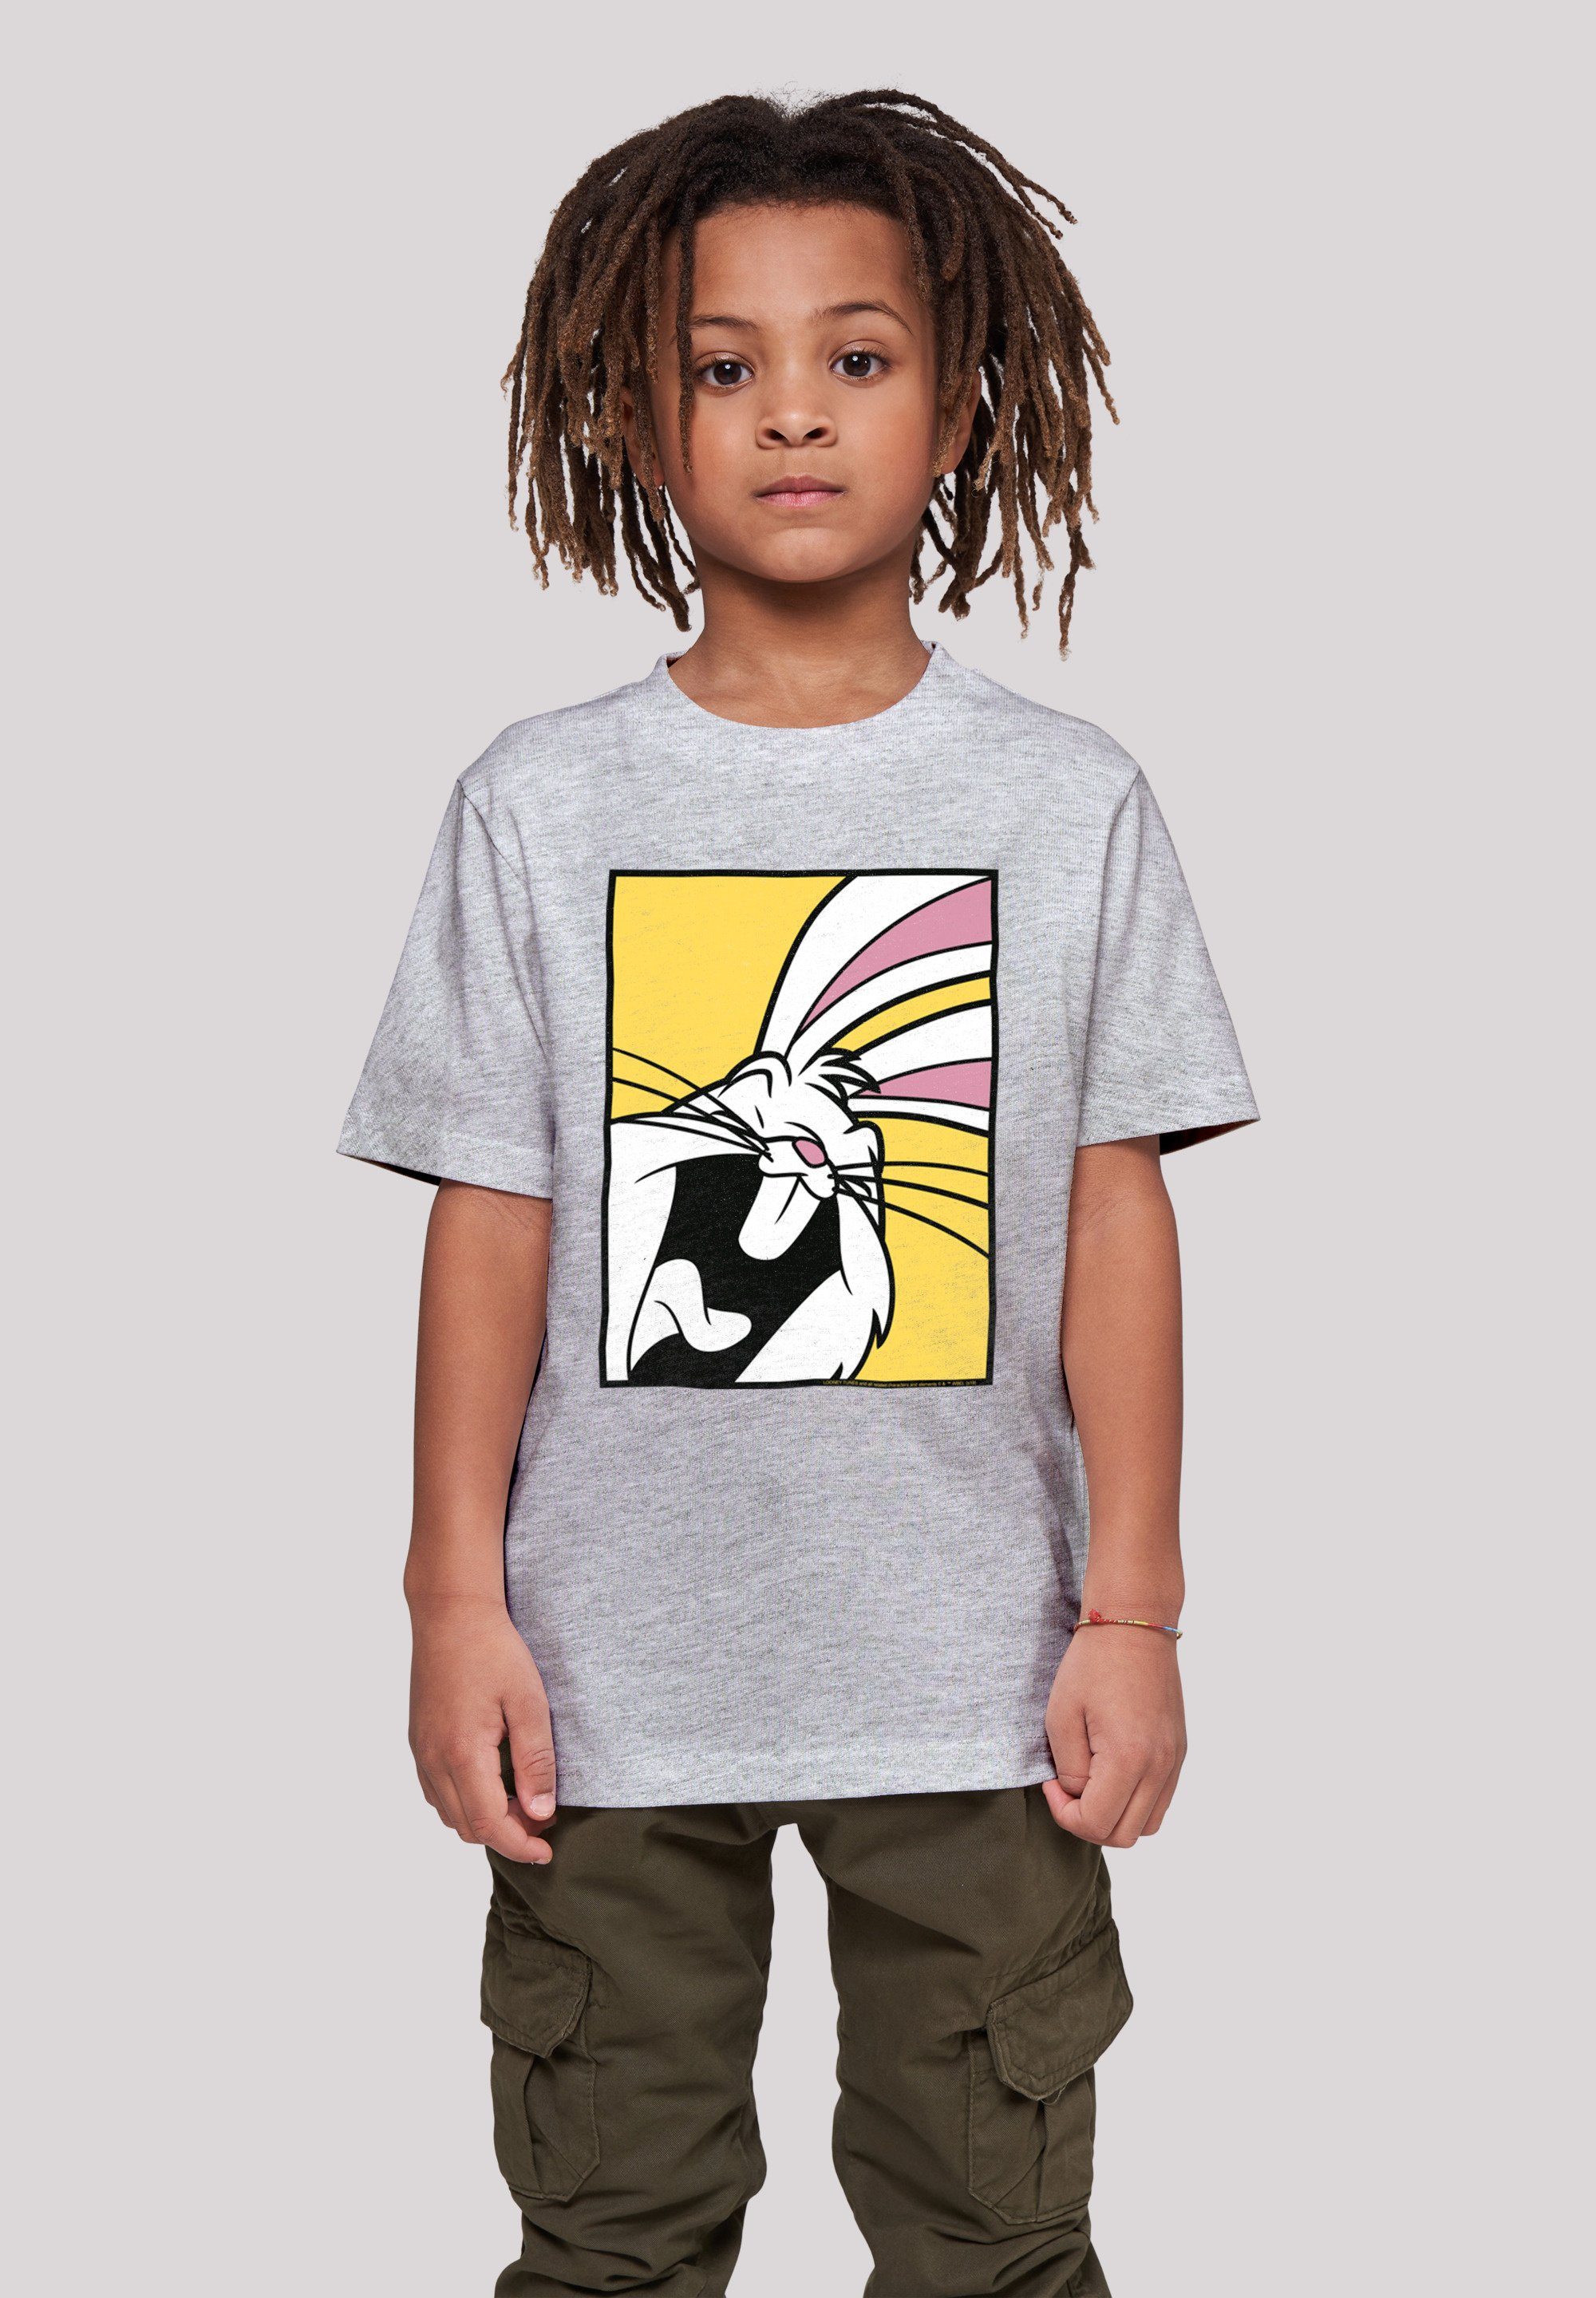 F4NT4STIC T-Shirt Looney Tunes heather grey Bugs Laughing Bunny Print